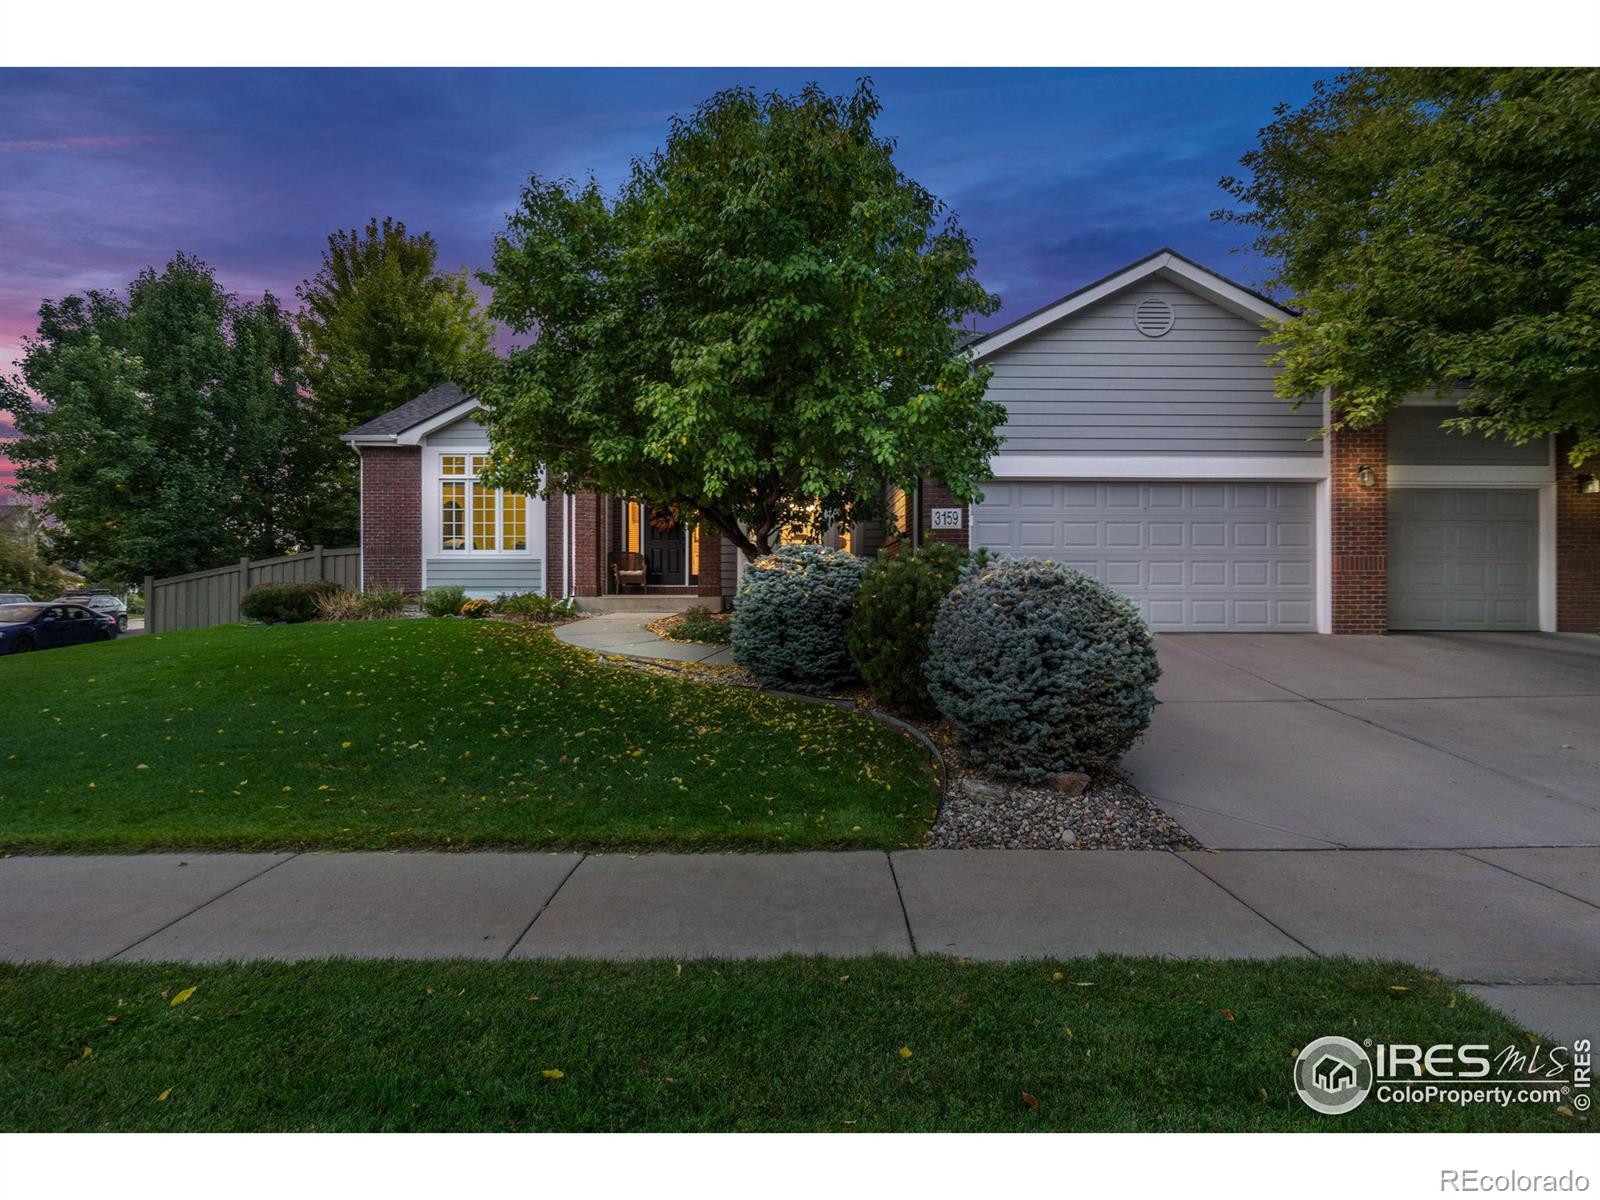 3159  Twin Wash Square, fort collins MLS: 456789997915 Beds: 5 Baths: 4 Price: $910,000